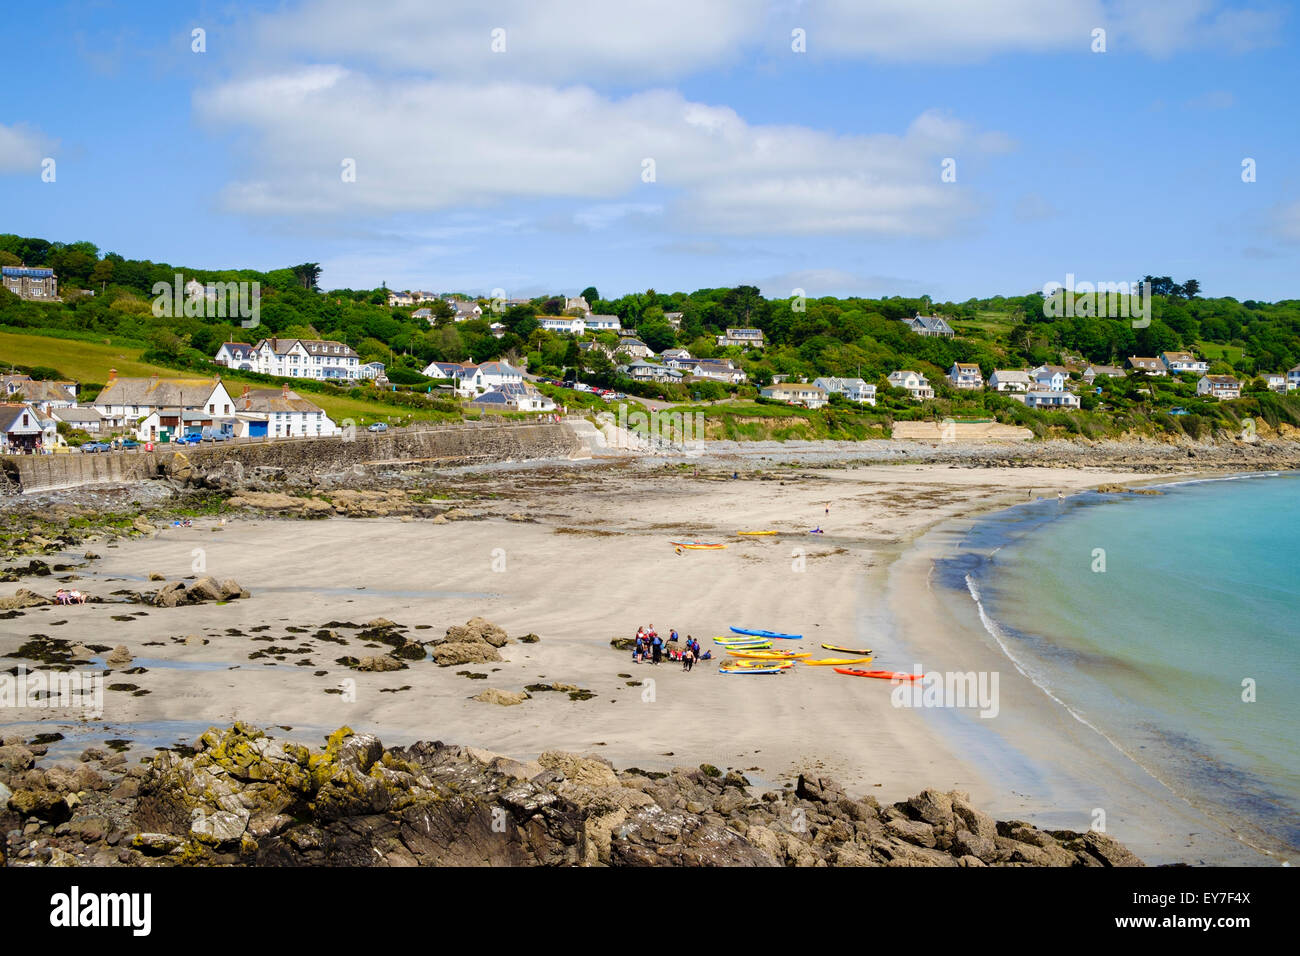 People with canoes on the beach at Coverack, Lizard Peninsula, Cornwall, England, UK Stock Photo